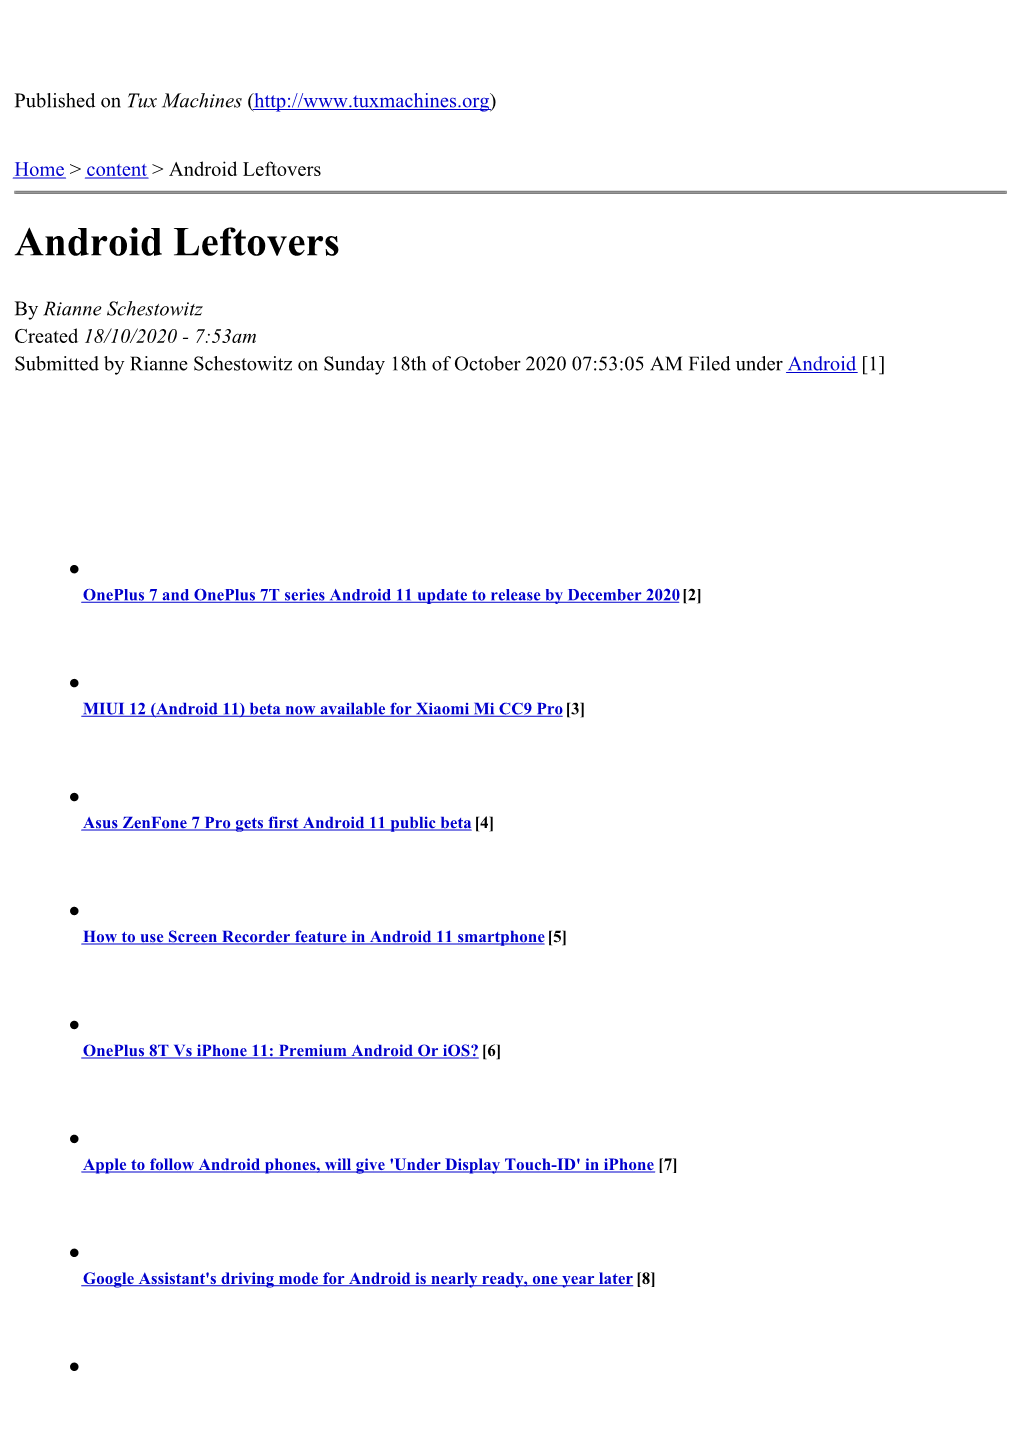 Android Leftovers